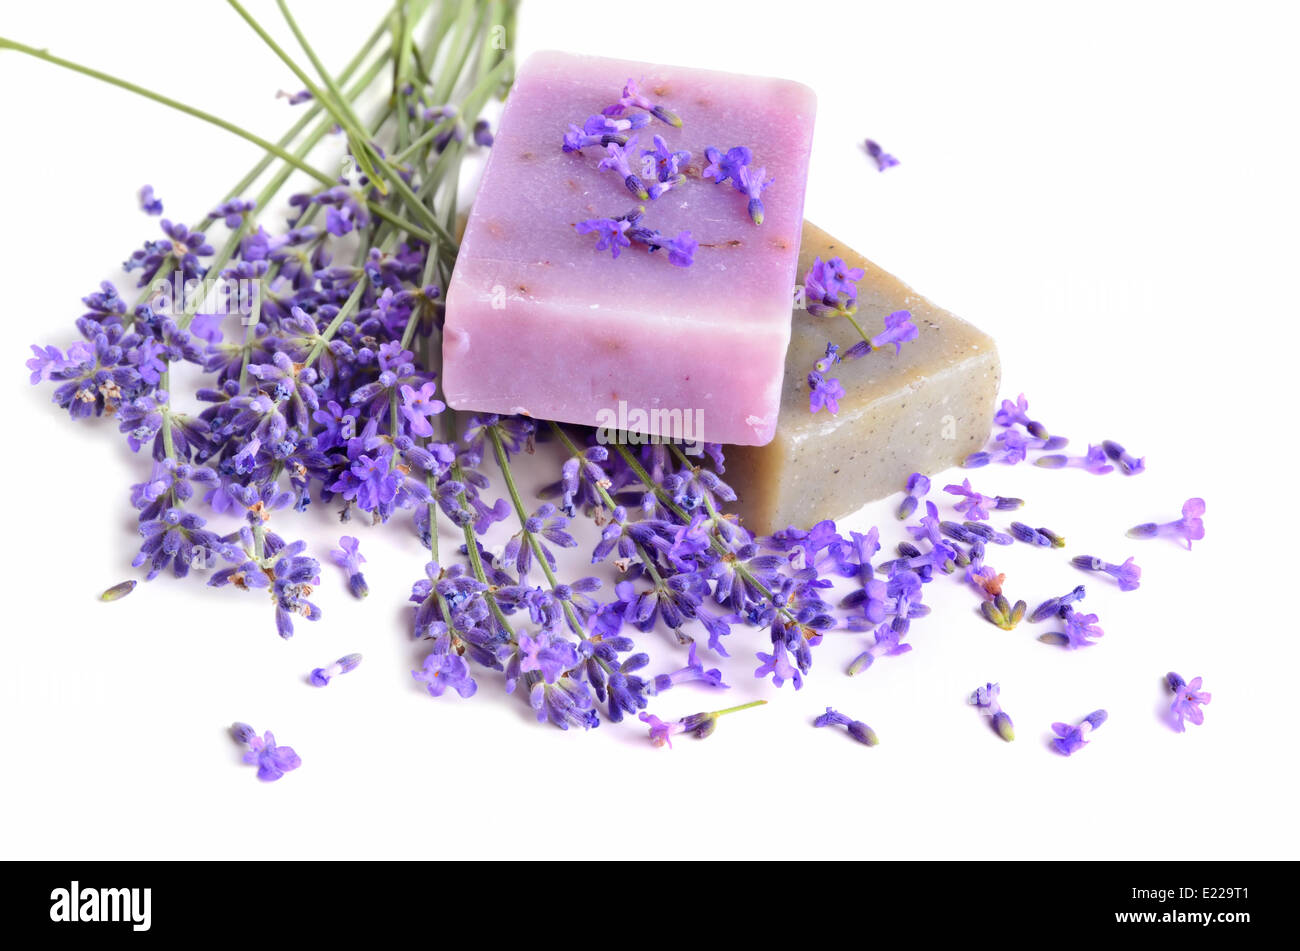 Lavender and soaps Stock Photo